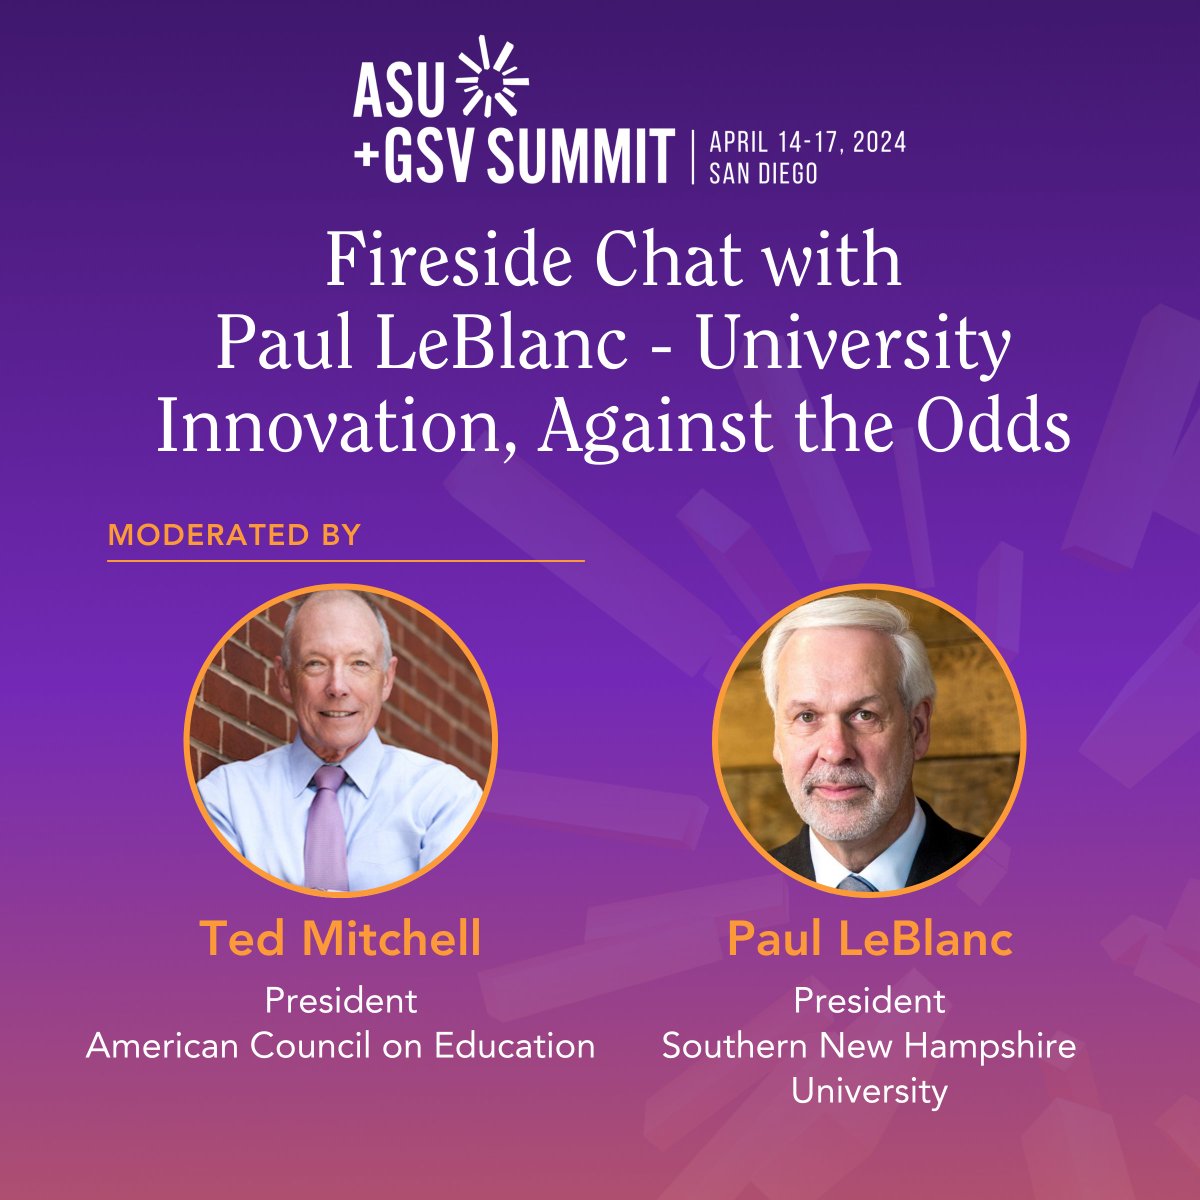 Universities are notoriously resistant to change, but occasional outliers sometimes truly buck the norm. Join us Tuesday, April 16 @ 10:10am in Cortez Hill C, Level 3 for a discussion with Ted Mitchell and Paul LeBlanc. Save this page to stay updated: bit.ly/4b5FOoz